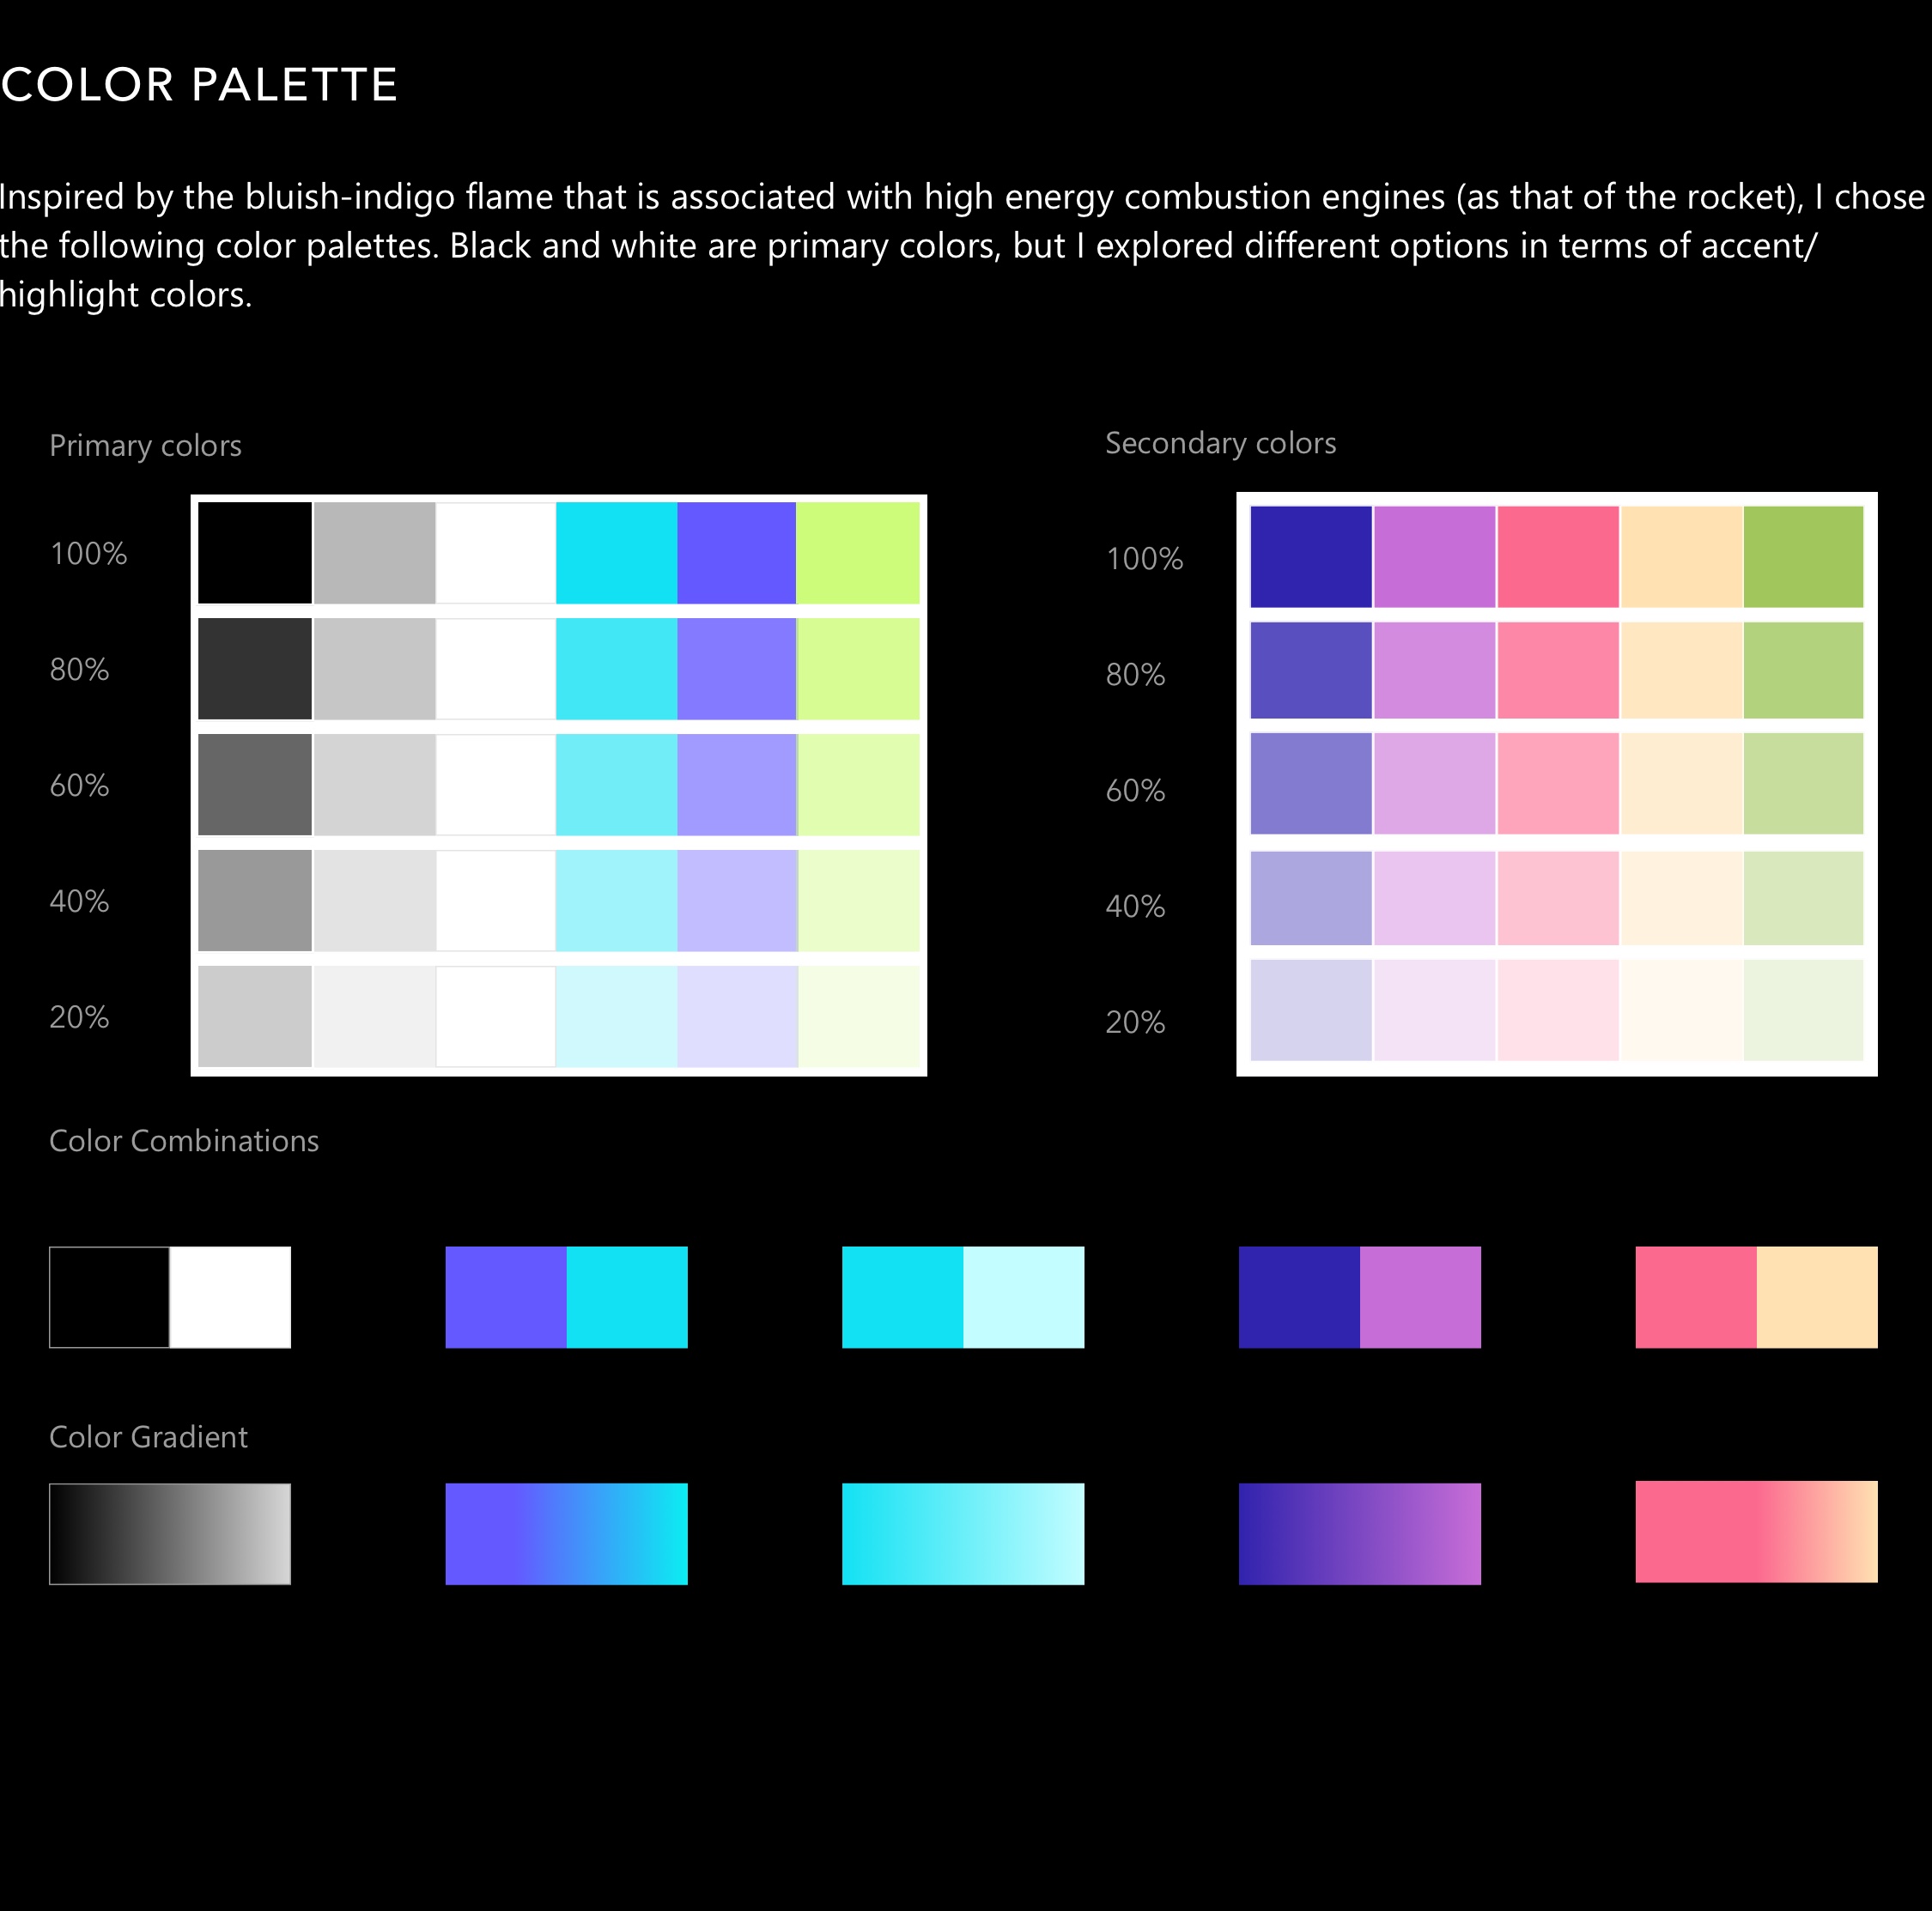 Identity System: Color Palette. Inspired by the bluish-indigo flame that is associated with high energy combustion engines (as that of the rocket), I chose the following color palettes. Black and white are primary colors, but I explored different options in terms of accent/highlight colors.